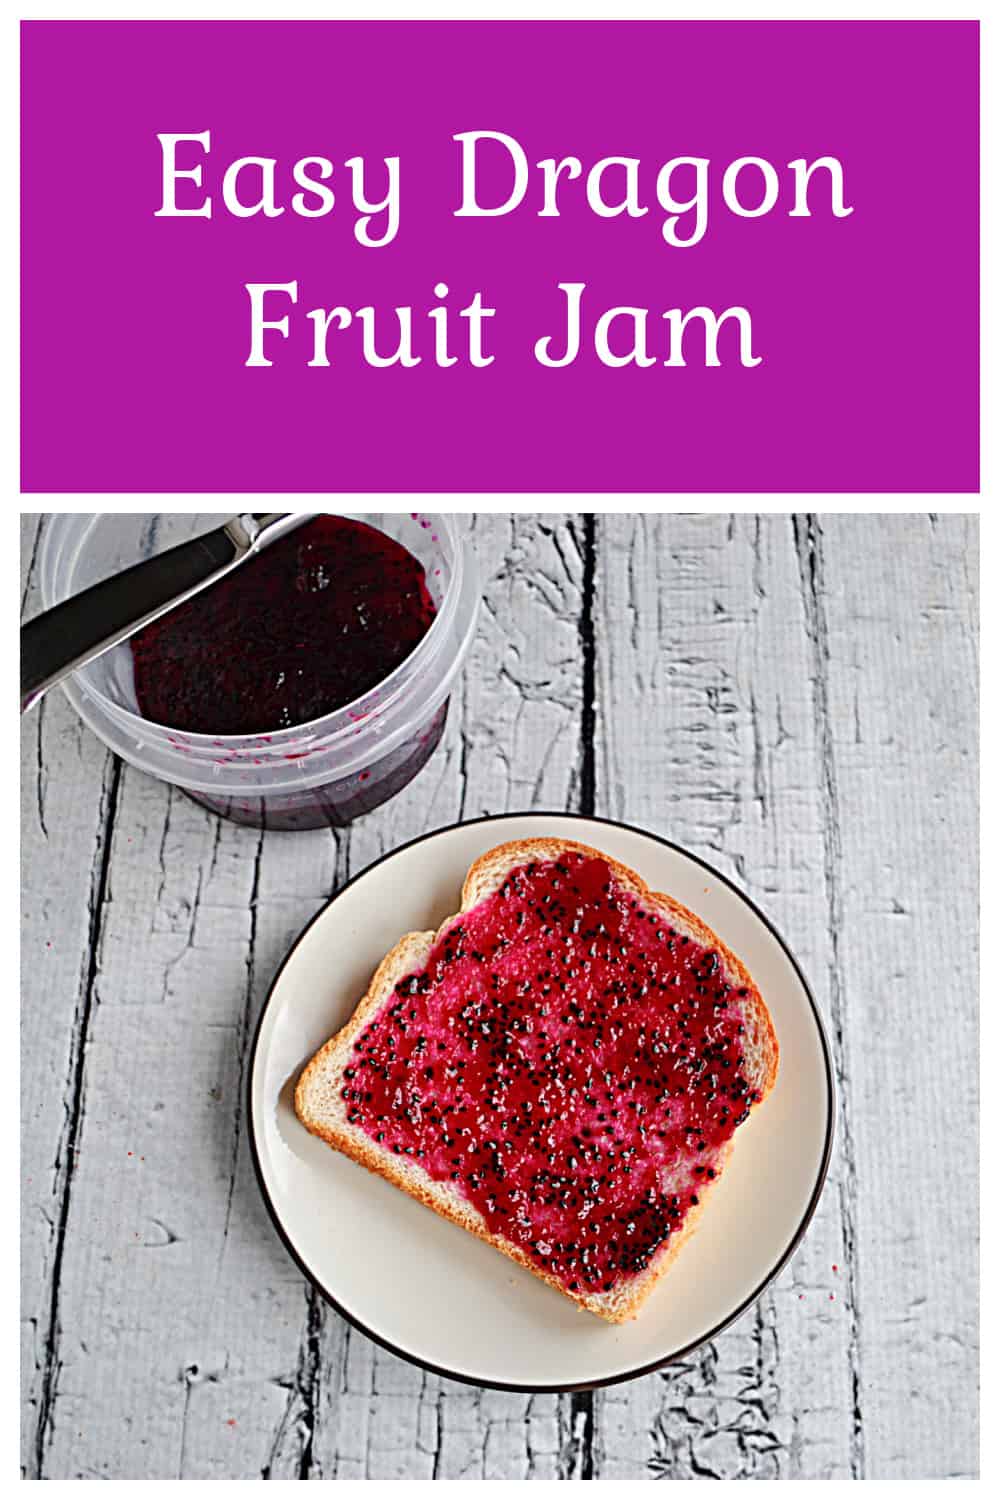 Pin Image: Text title, a plate with a piece of toast topped with jam and a container of jam behind it.